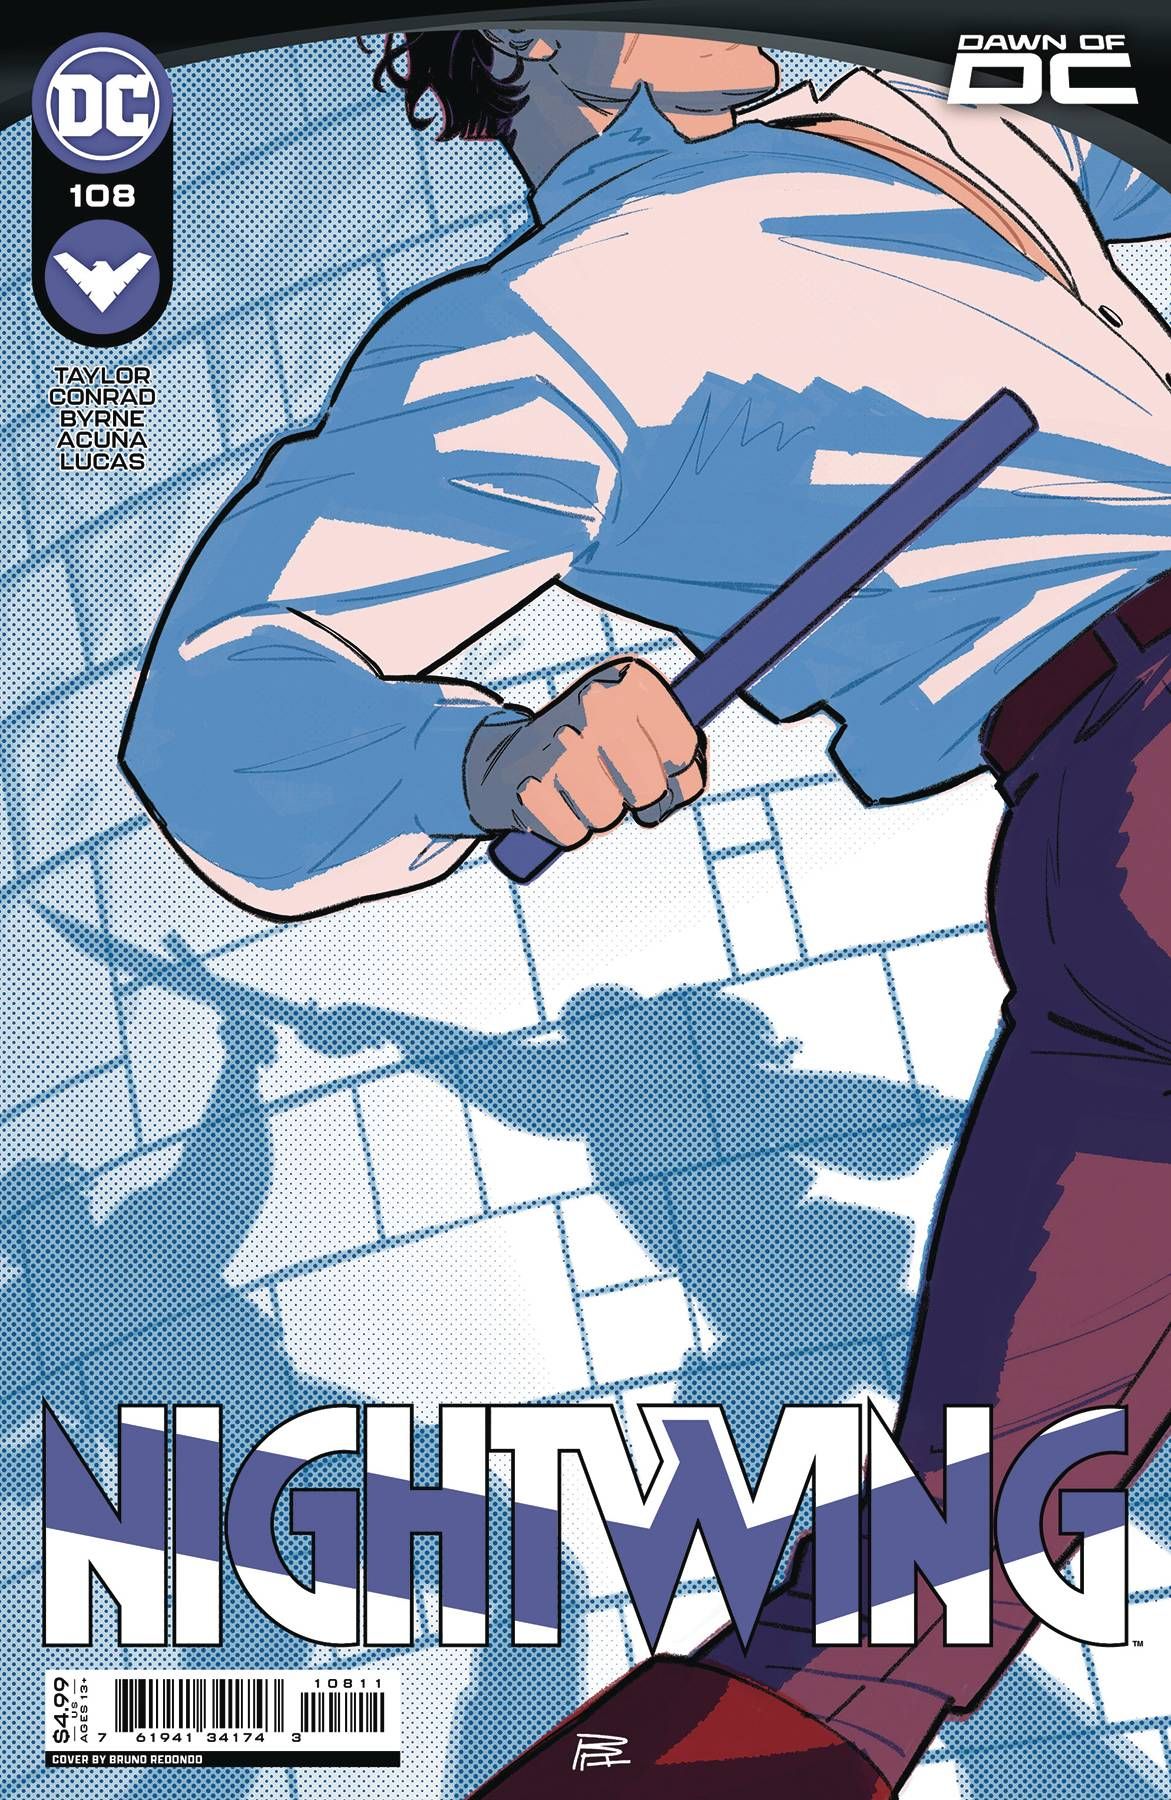 Nightwing 108 Main Cover: A man in a white shirt fights with a blue staff.  Human shadows in the background illustrate the fighting.